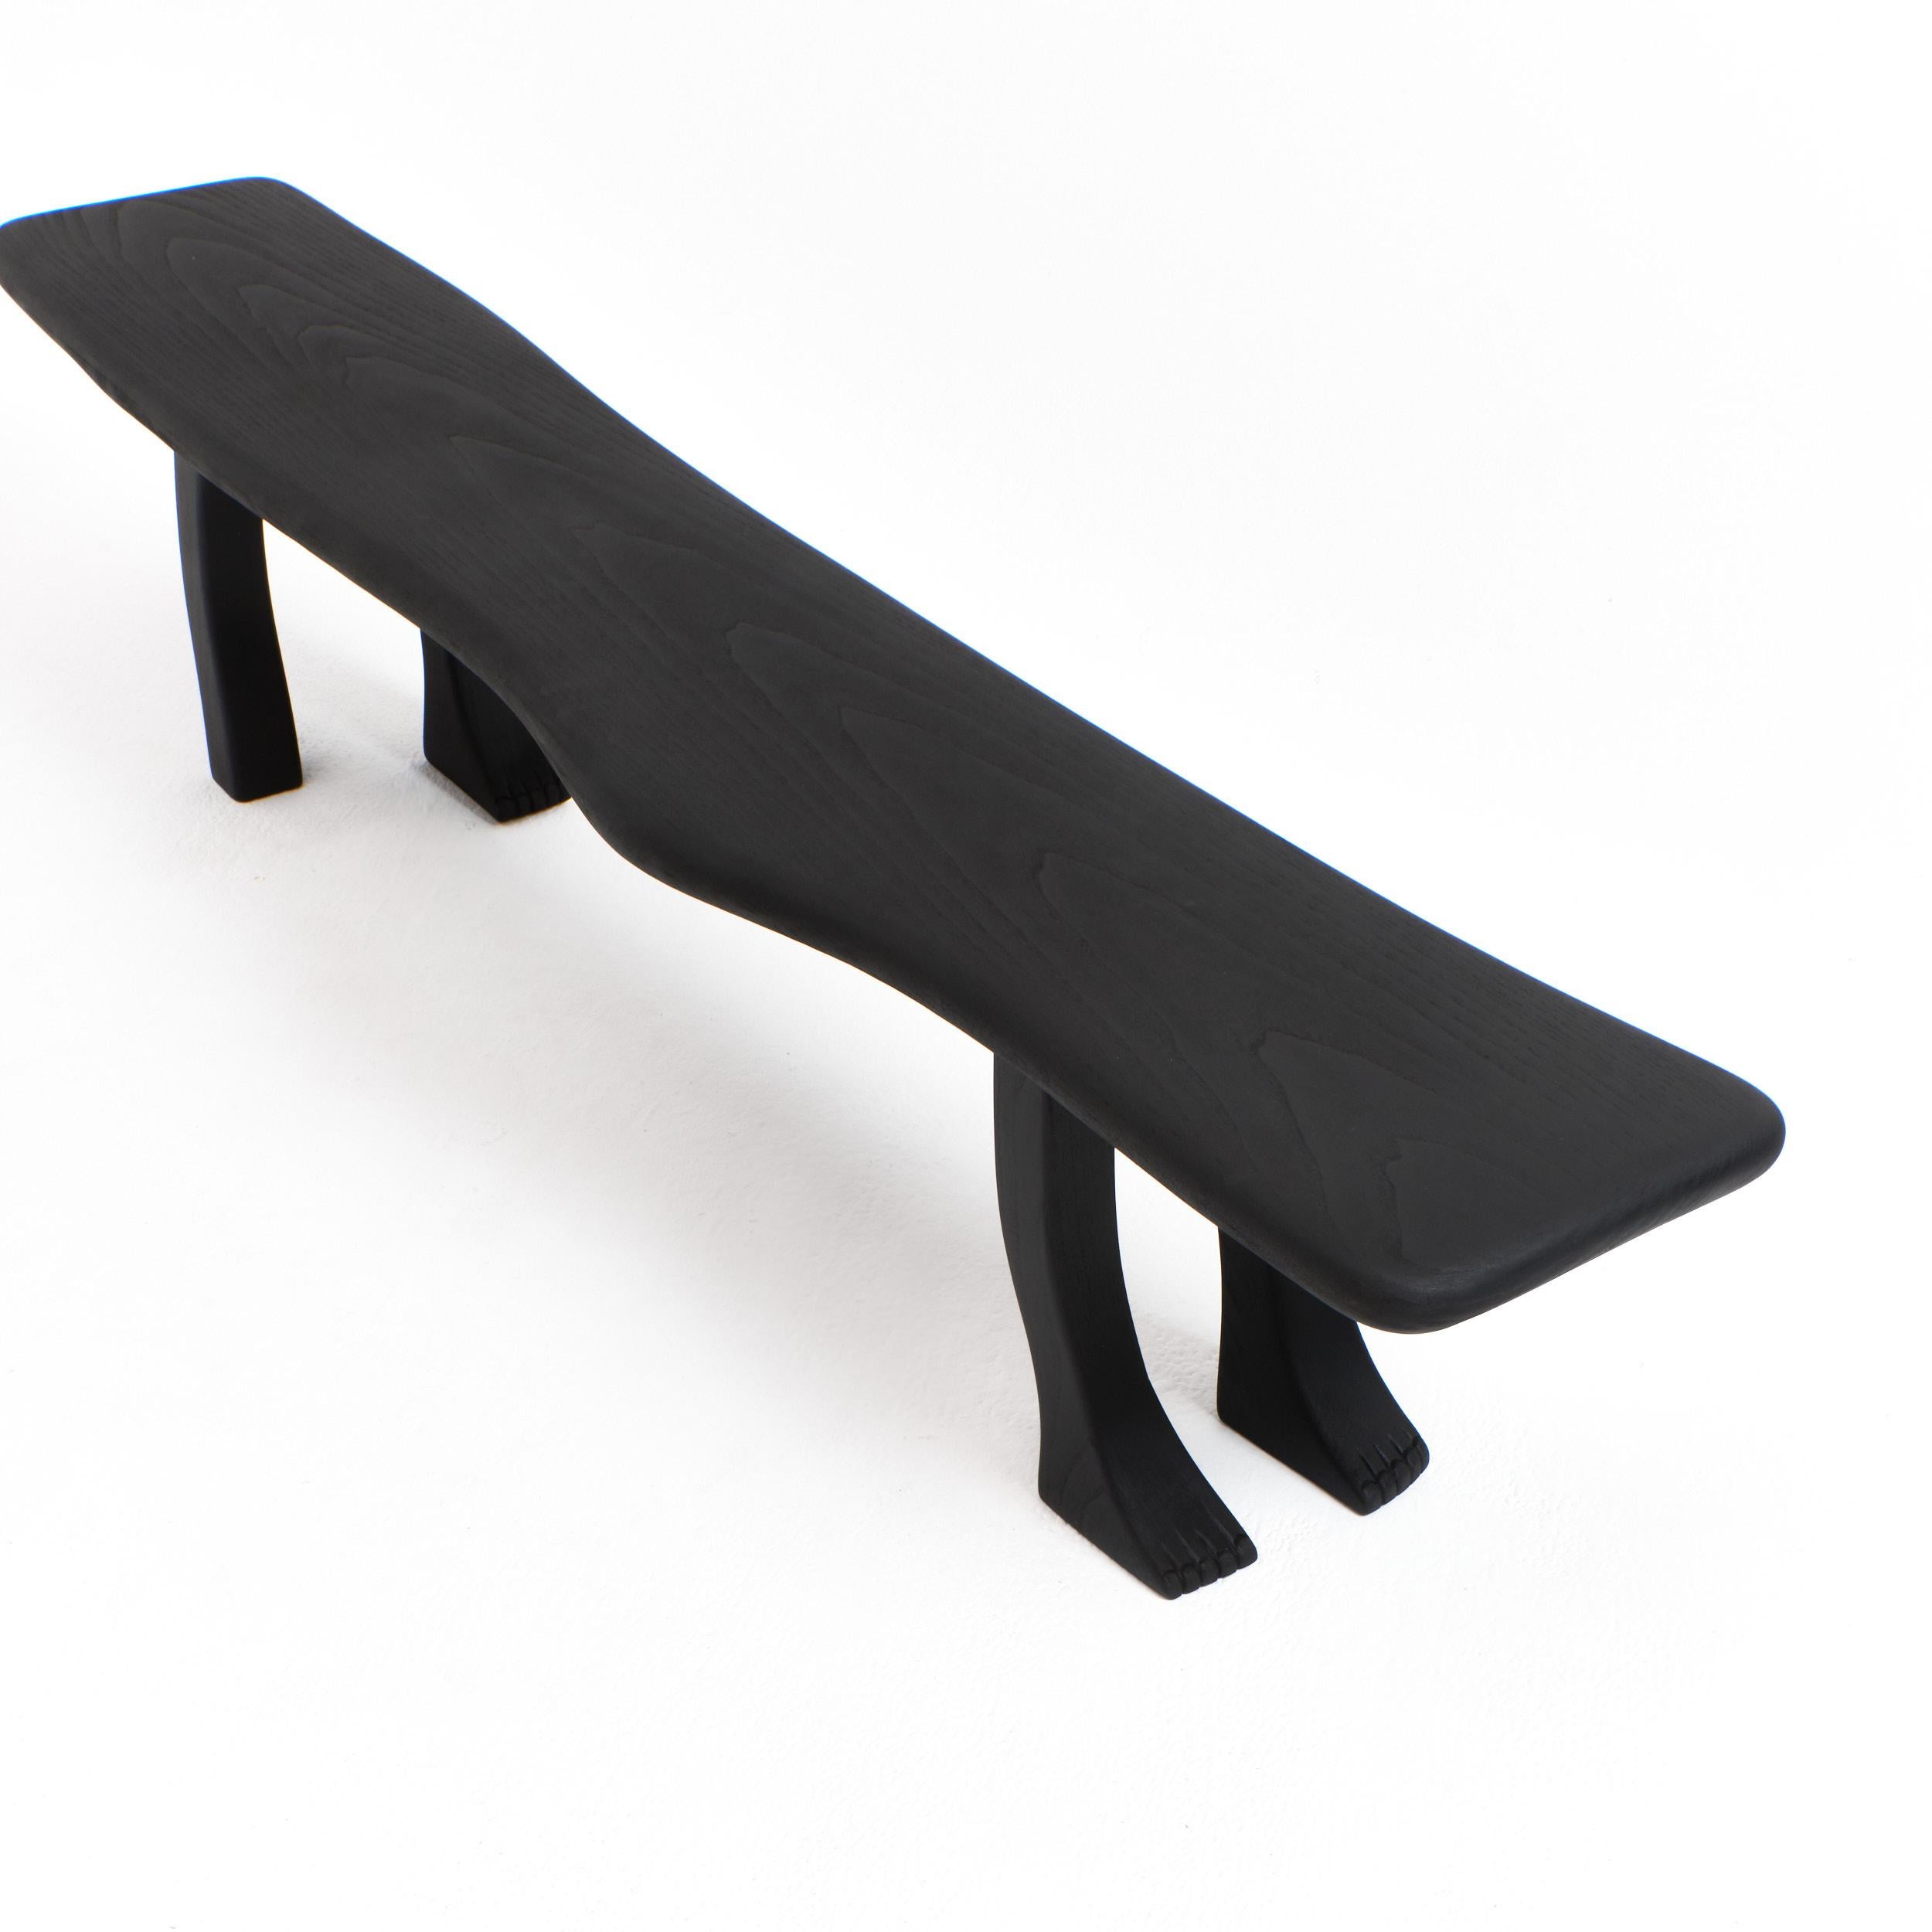 Portuguese Foot Bench in black For Sale